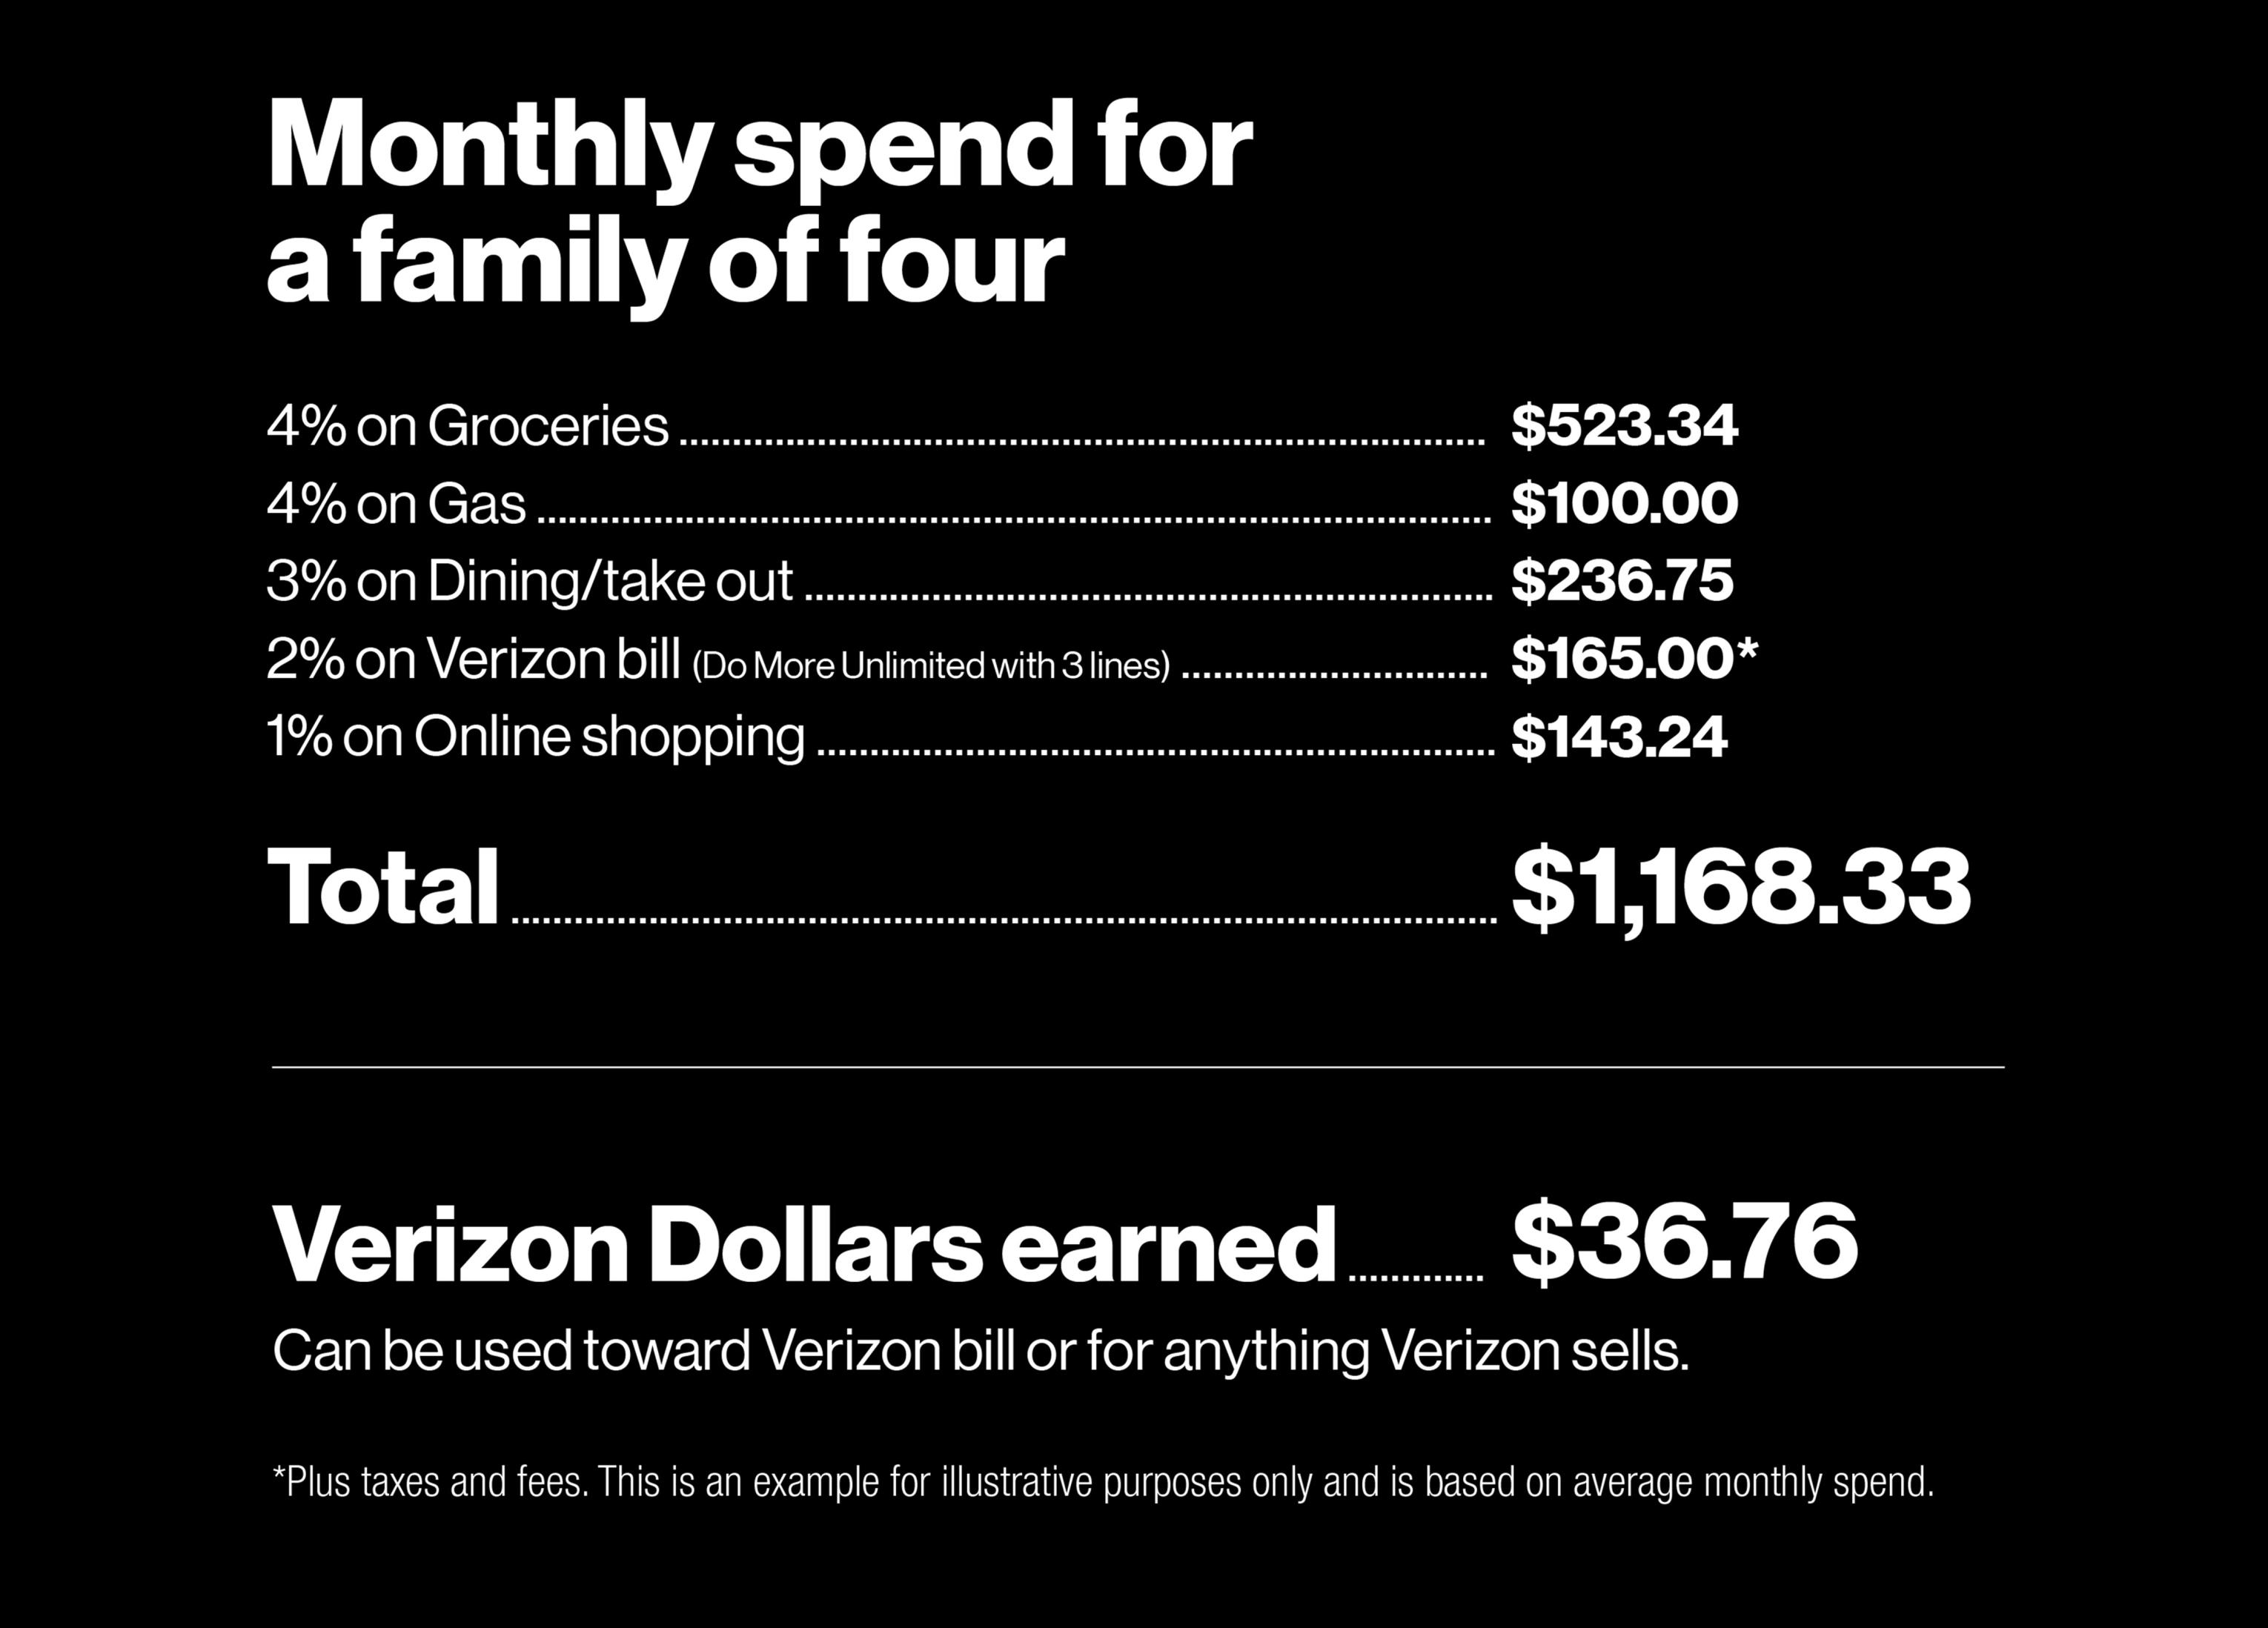 Introducing The Verizon Visa Card A New Way For Verizon Customers To Save On Their Bill